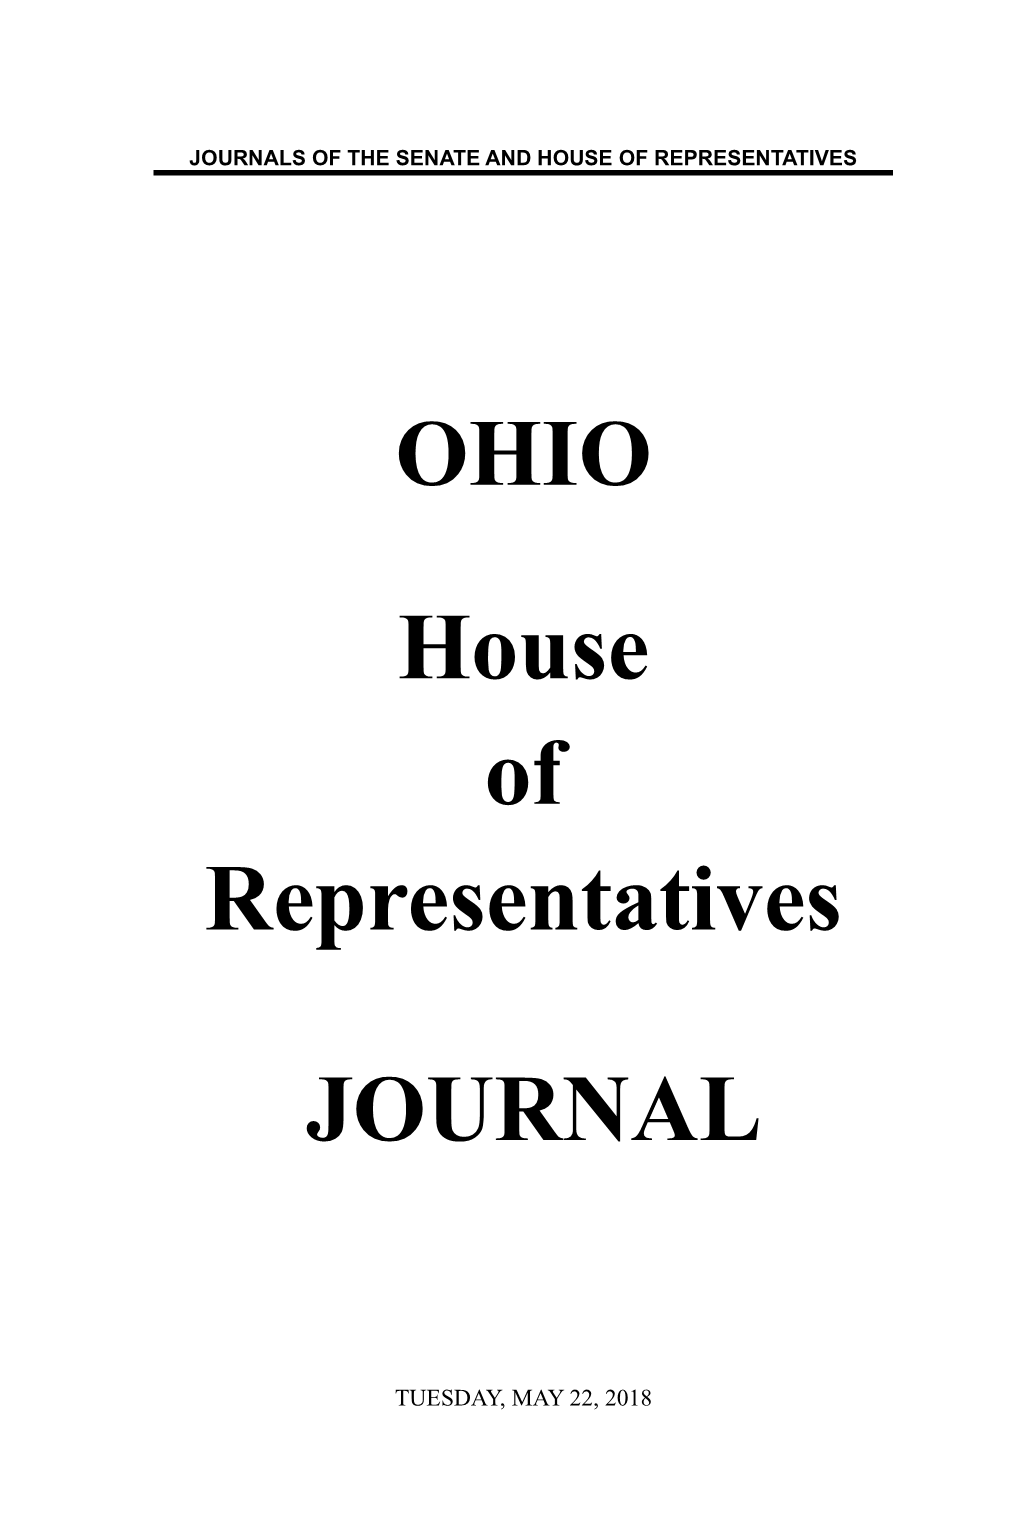 Ohio House of Representatives As They Occur